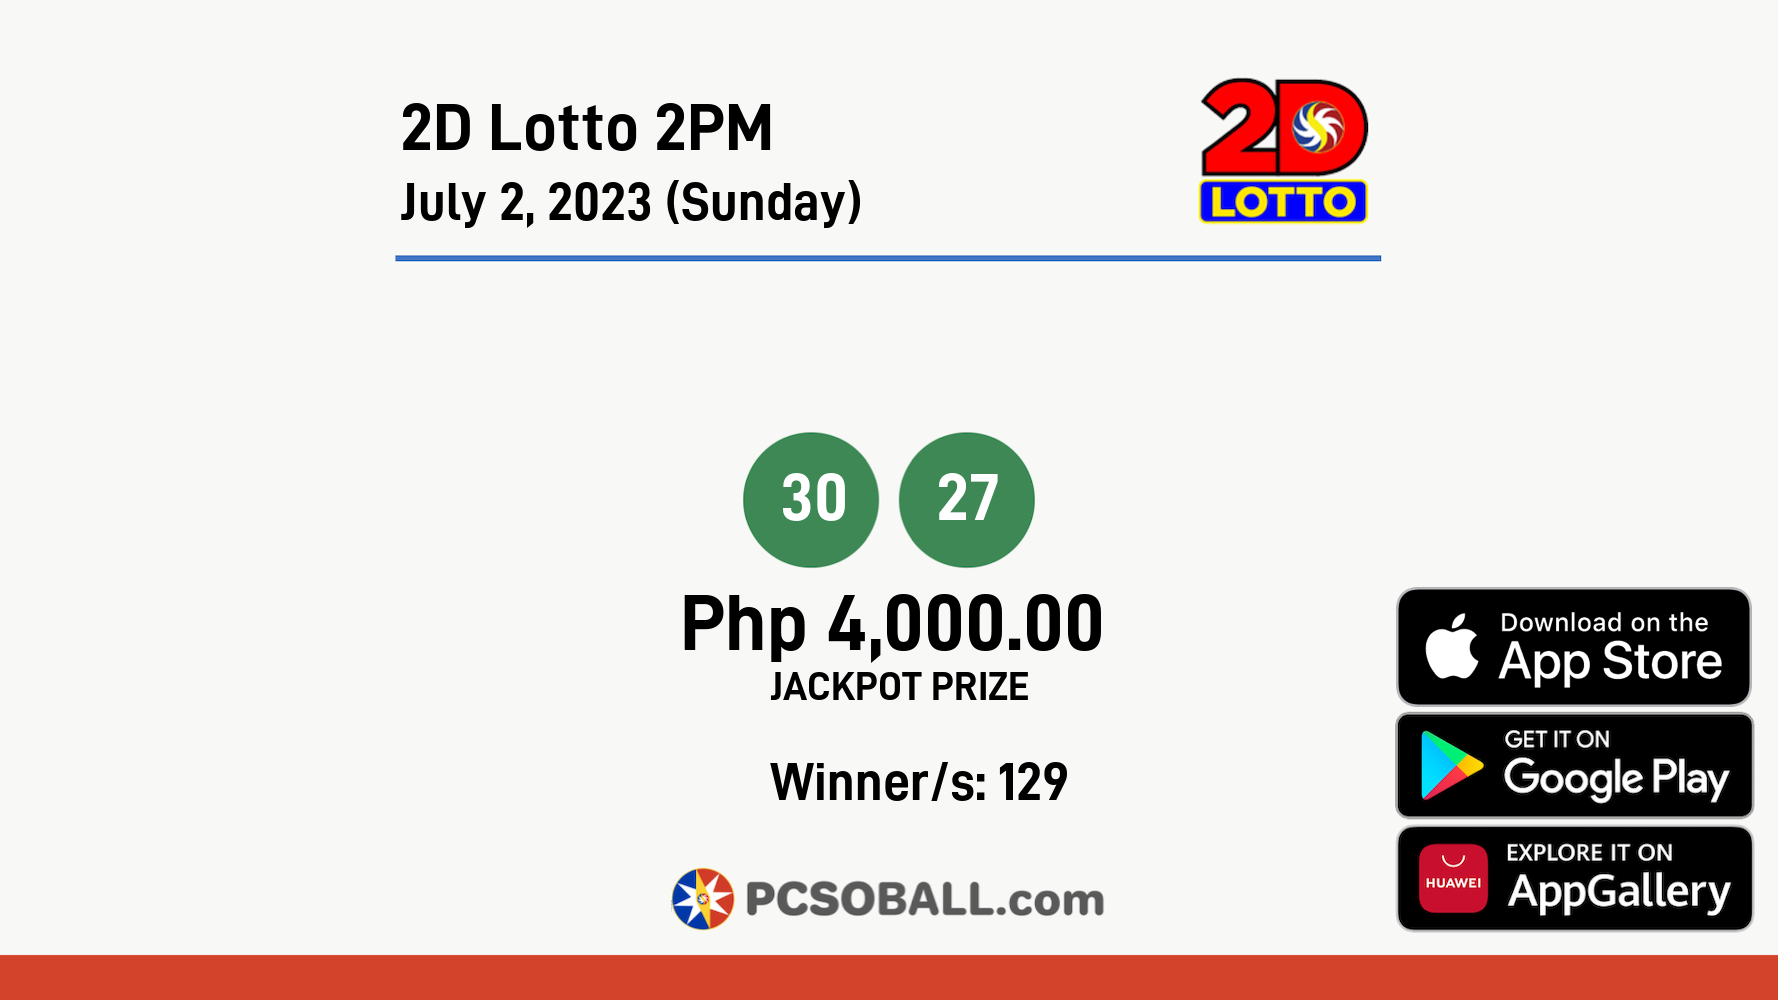 2D Lotto 2PM July 2, 2023 (Sunday) Result